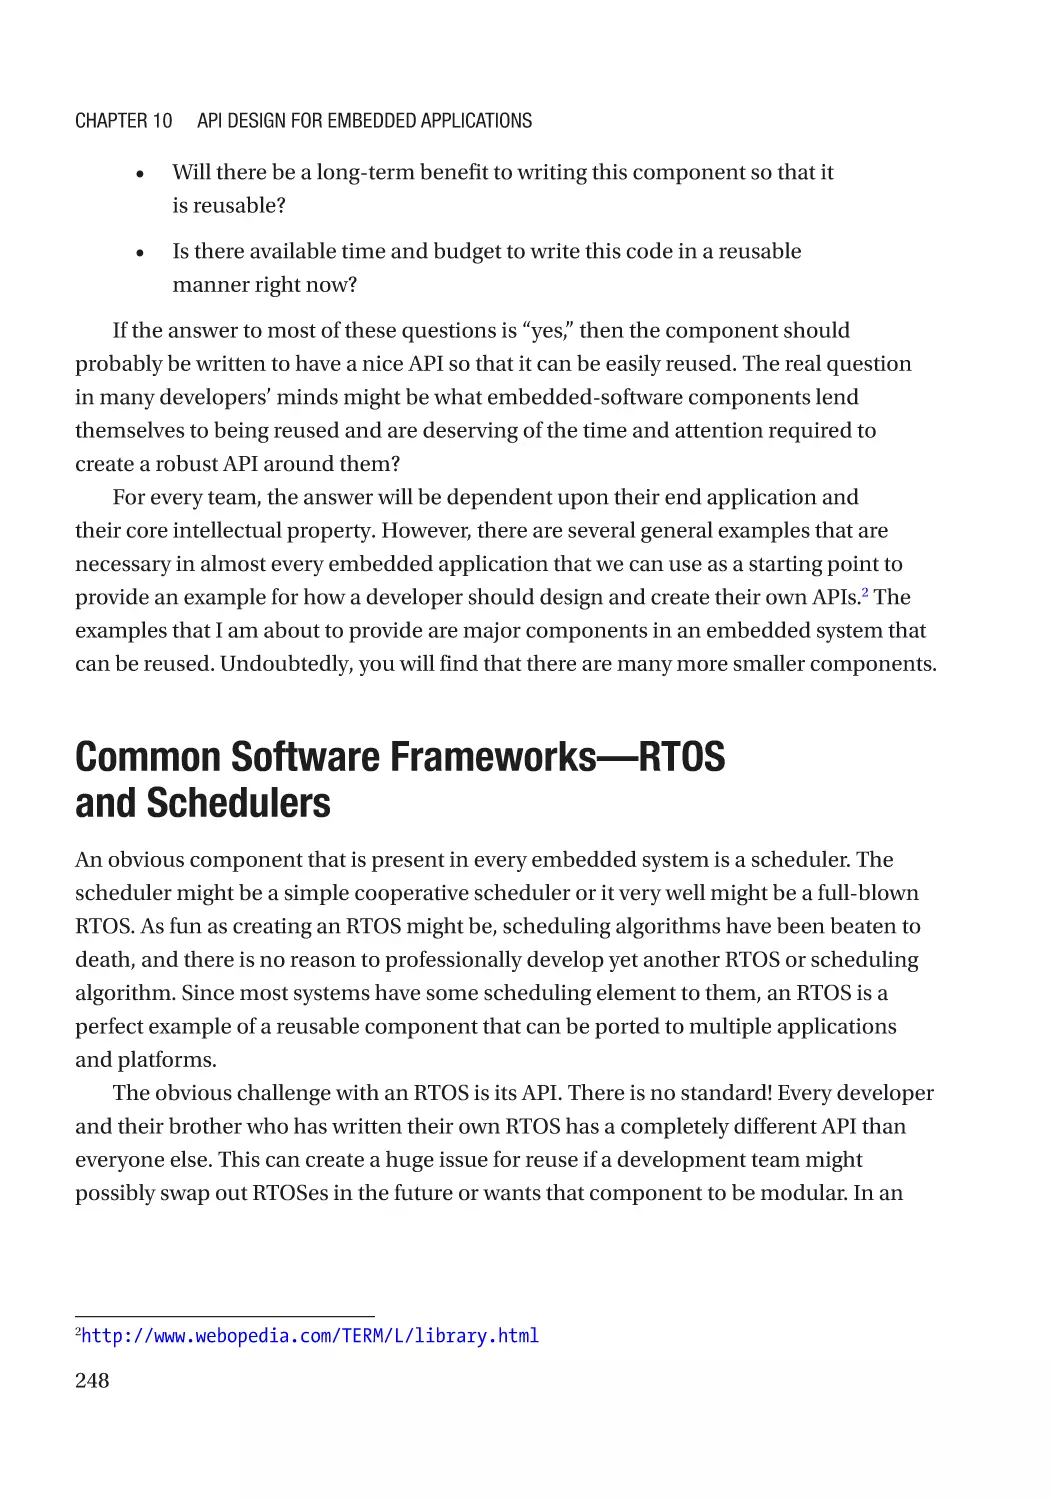 Common Software Frameworks—RTOS and Schedulers